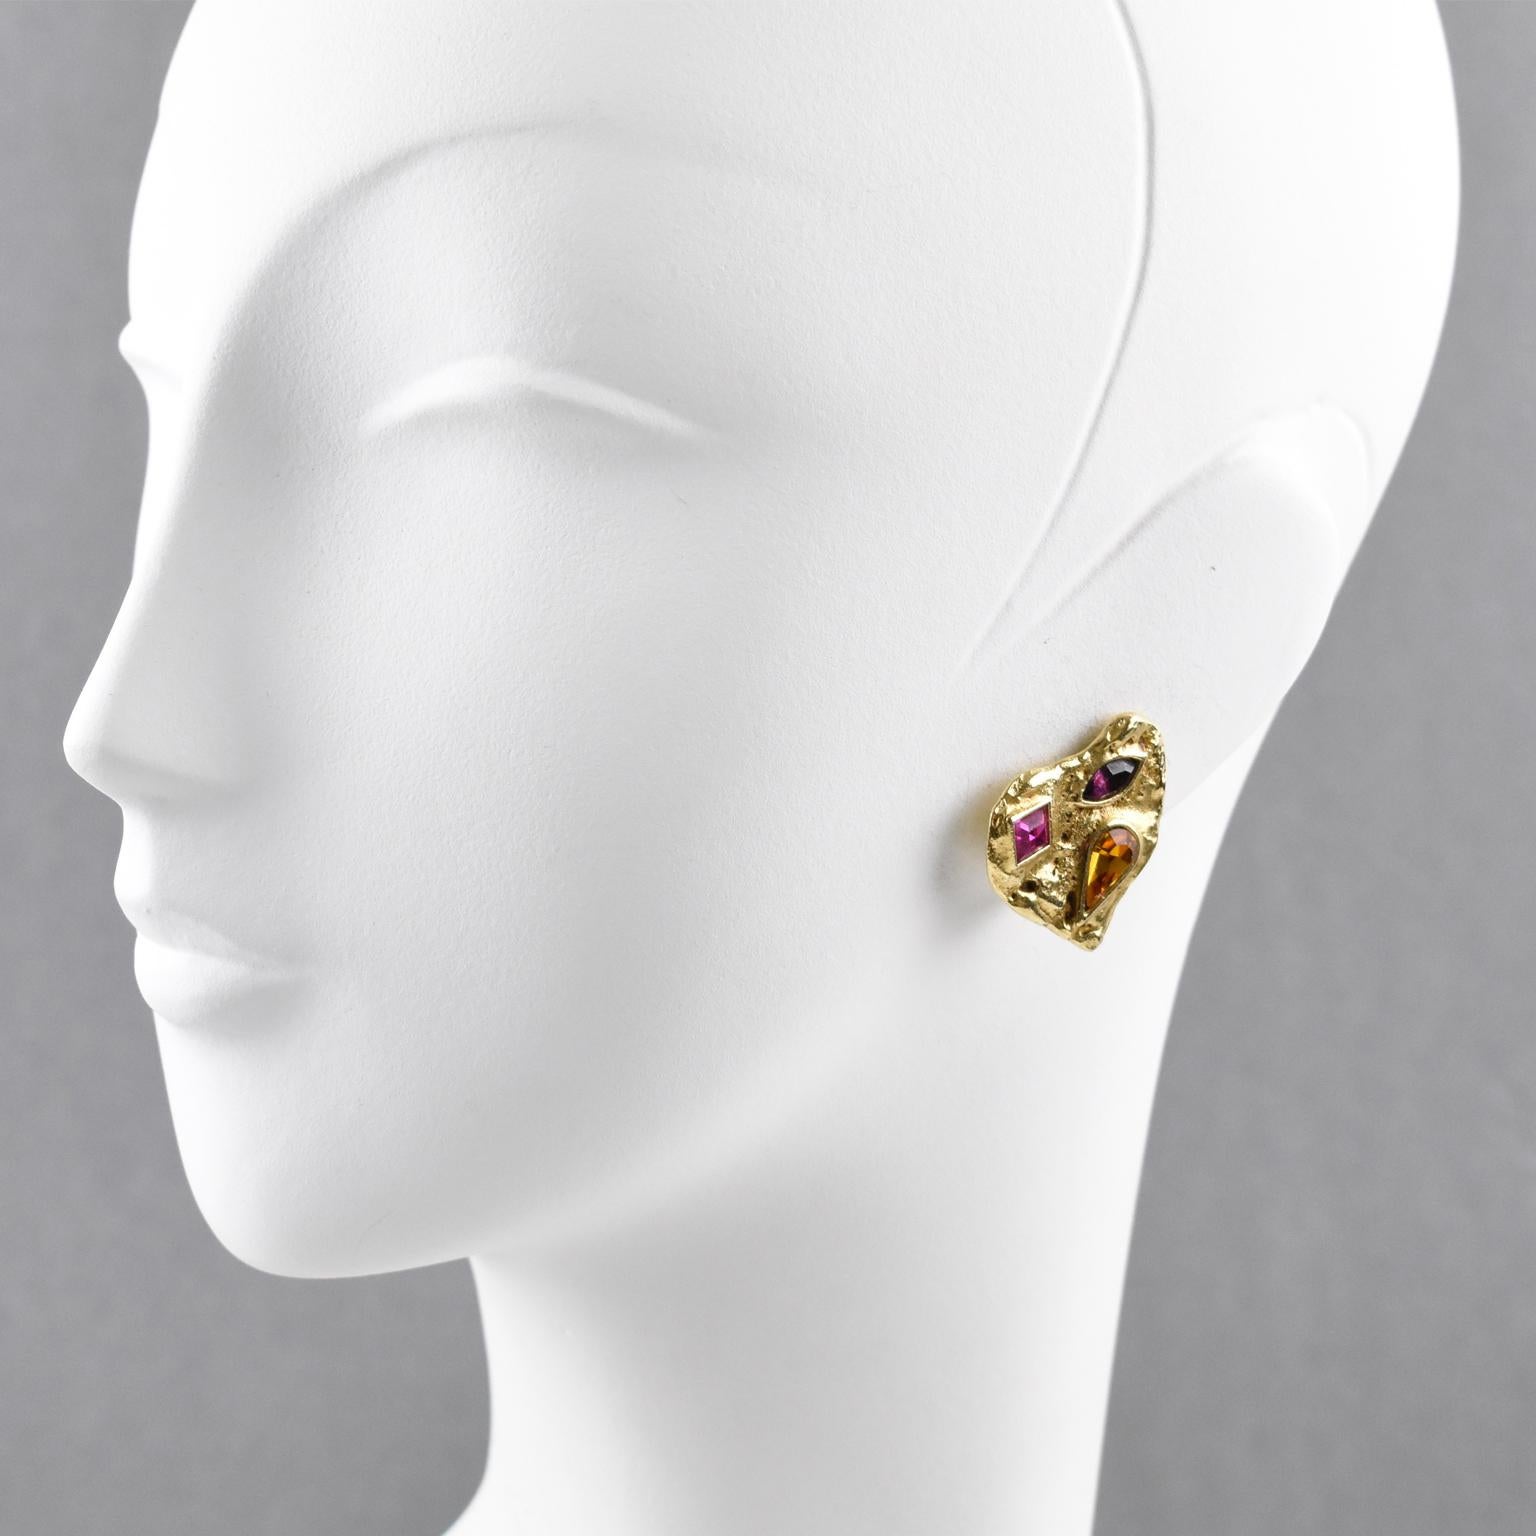 Elegant Yves Saint Laurent Paris signed clip on earrings. Abstract heart shape, gilt metal all textured ornate with multicolor glass rhinestones. Signed at the back with YSL pierced logo on clip and engraved underside: 'Made in